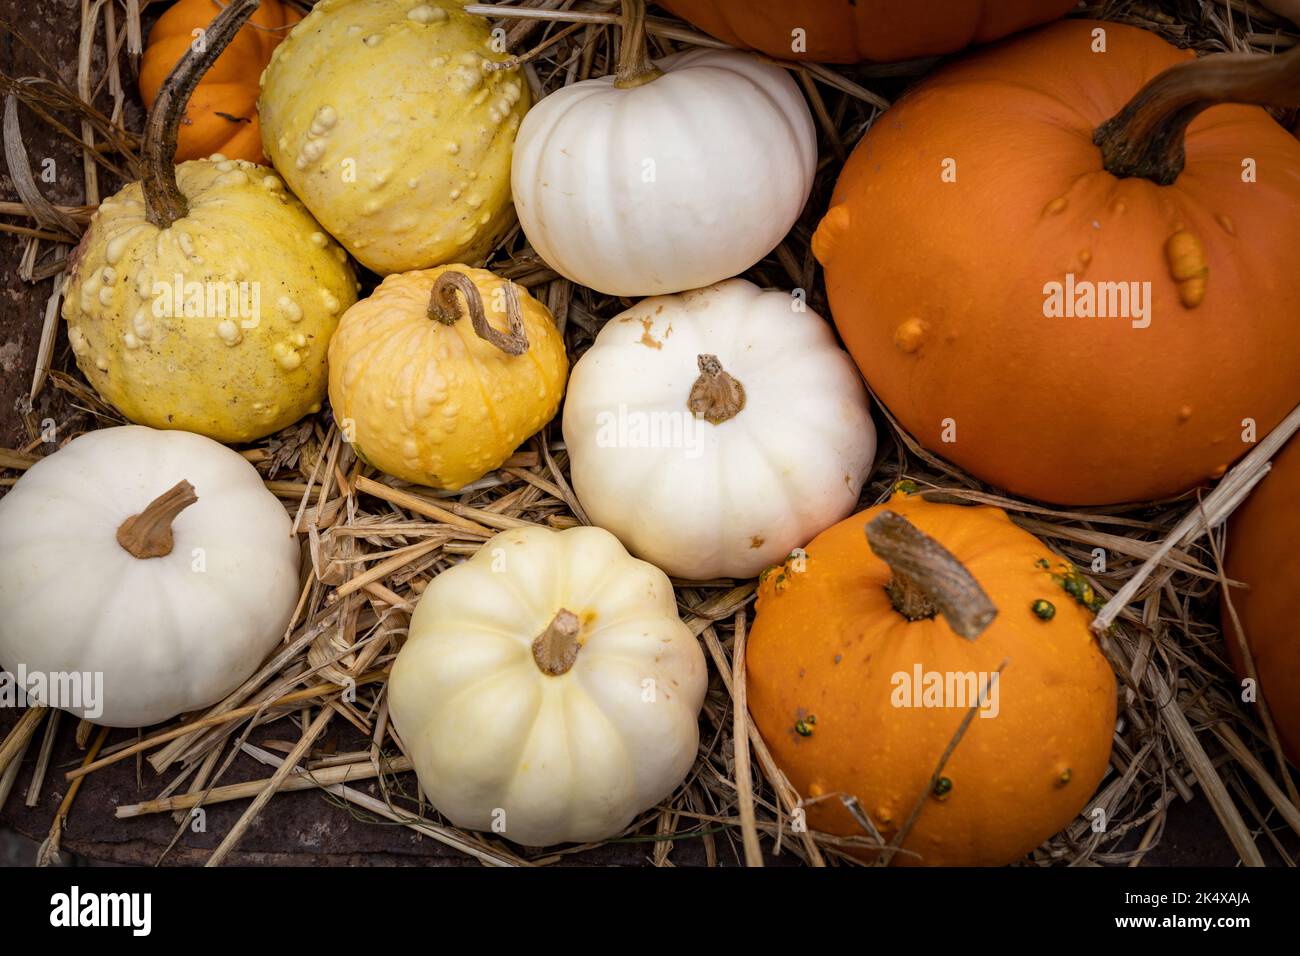 A variety of pumpkins and squashes on straw Stock Photo